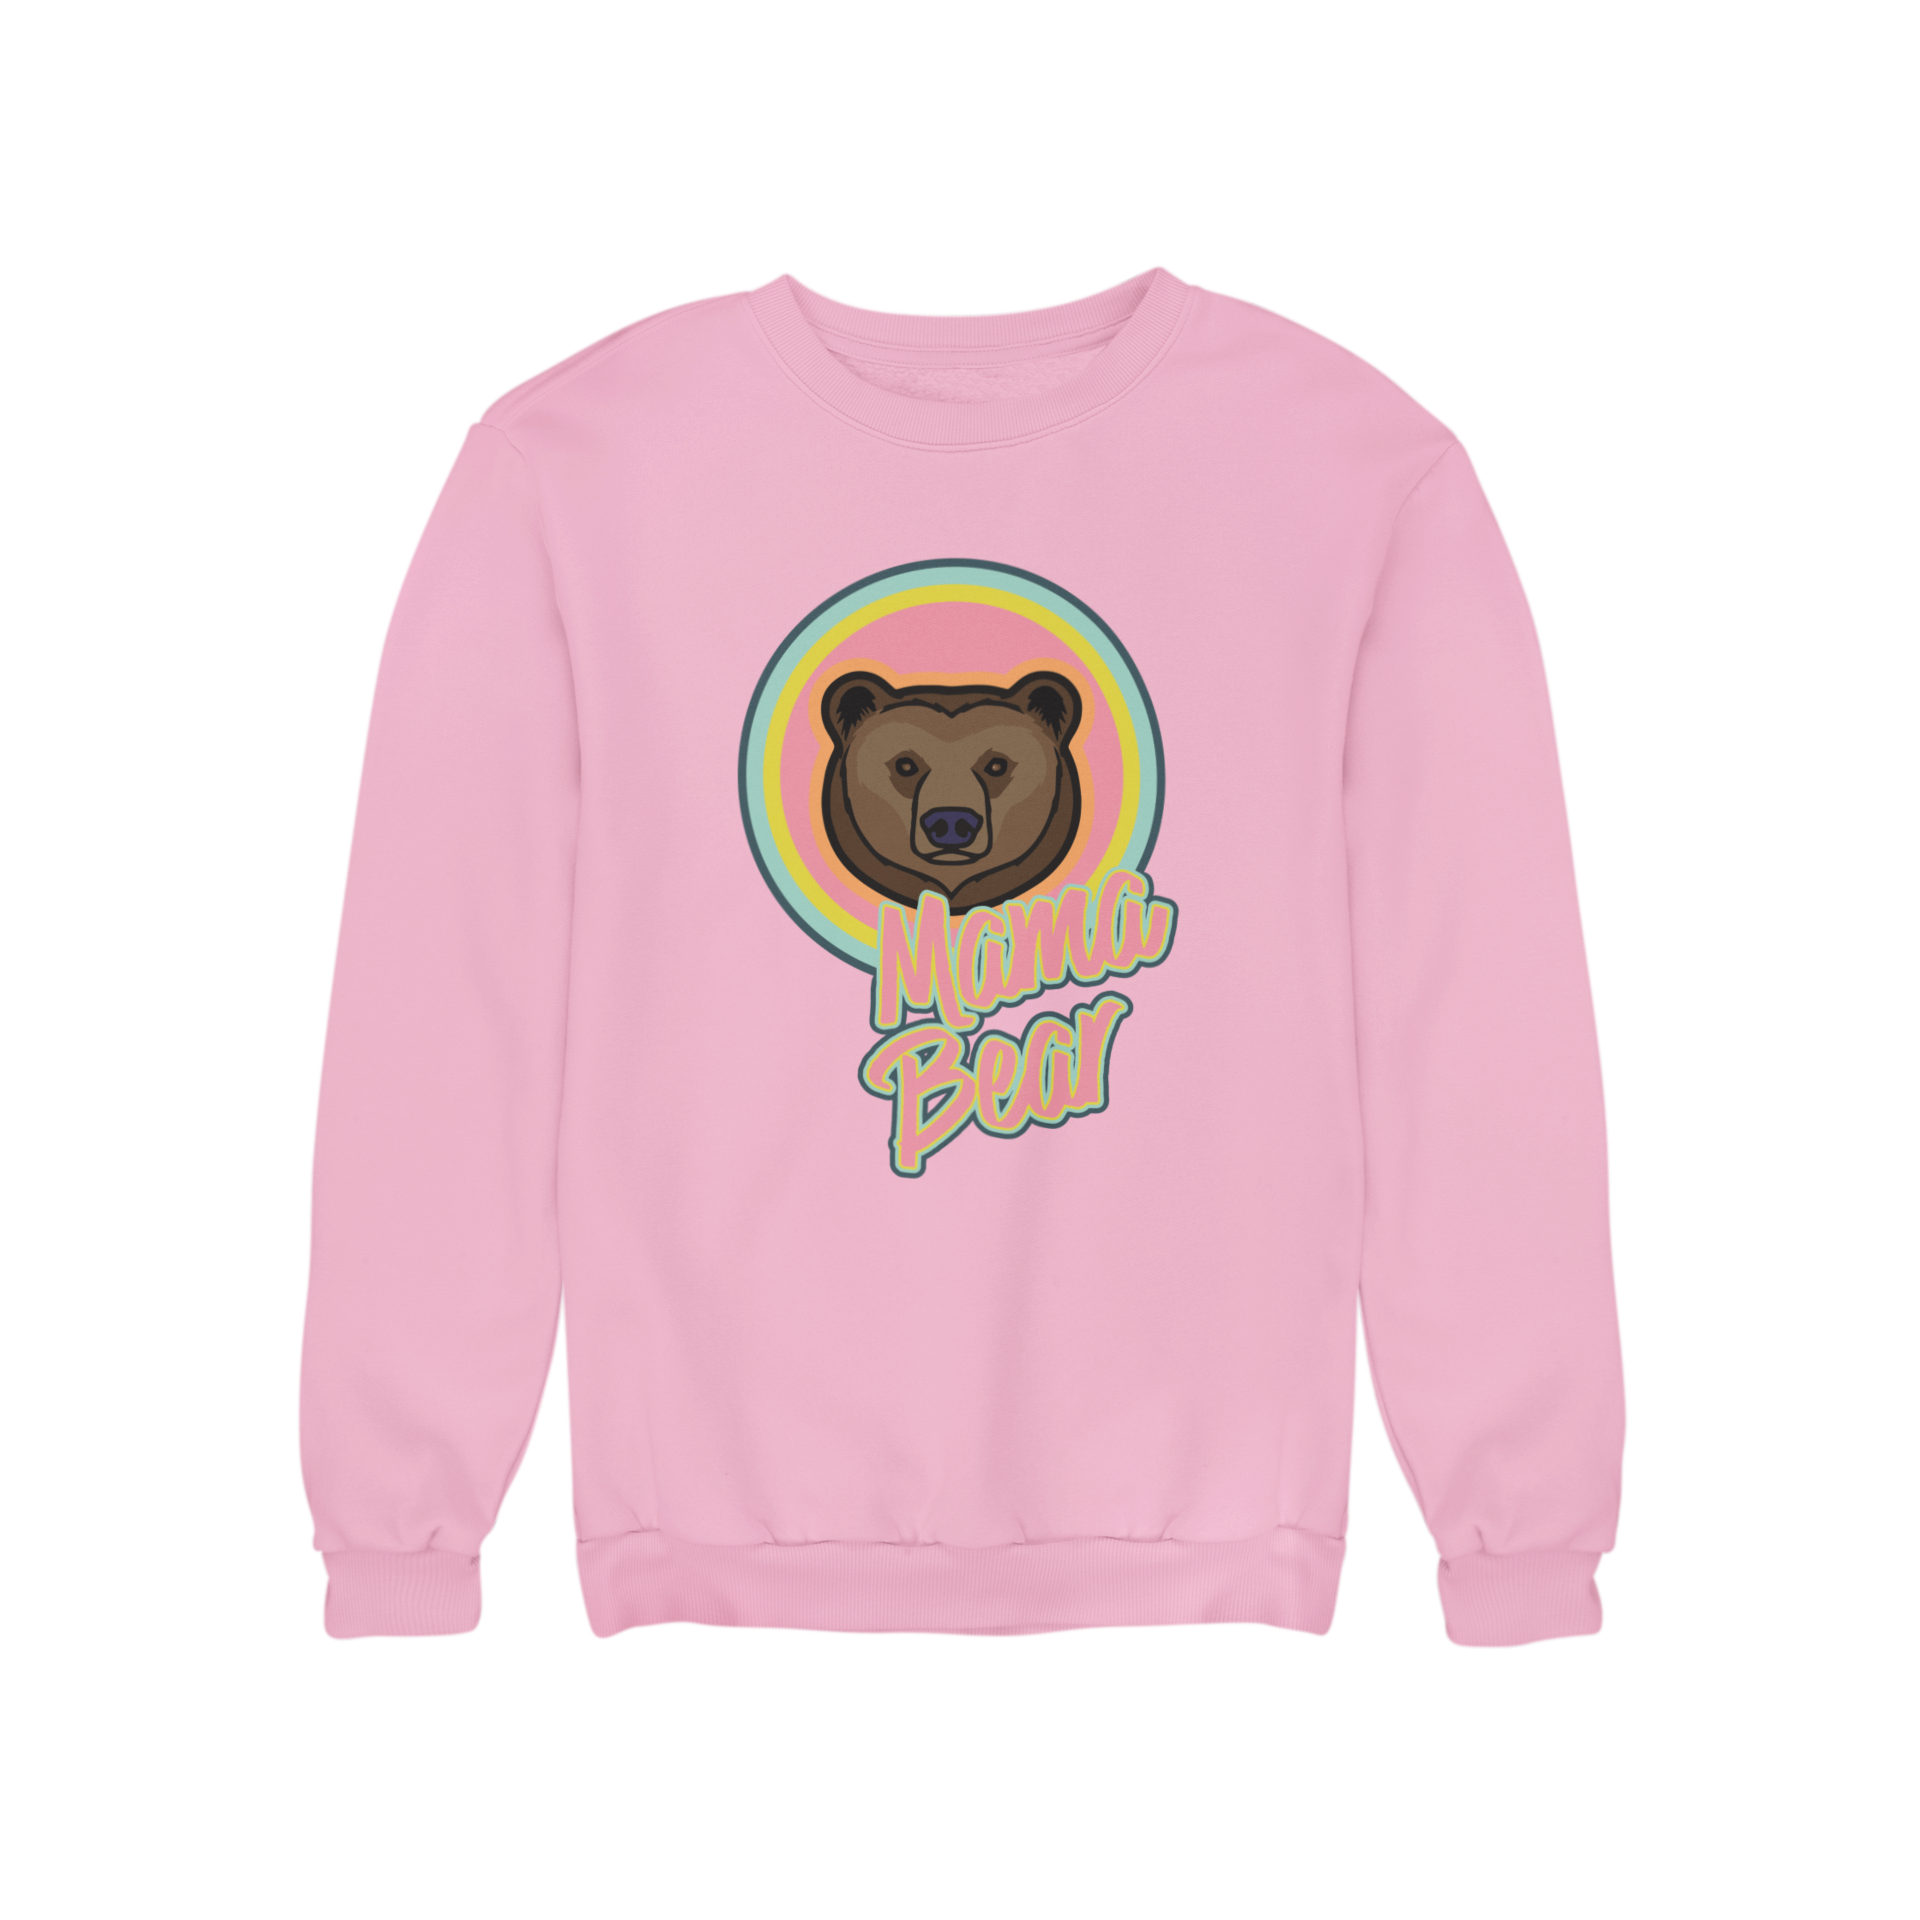 Looking for a stylish and comfortable sweatshirt? Teevolution has a perfect one for you! Our women's bright and colorful graphic sweatshirt features a graphic of a bear with the words "Mama Bear" on it. Stay cozy and fashionable with Teevolution's graphic sweatshirt collection.